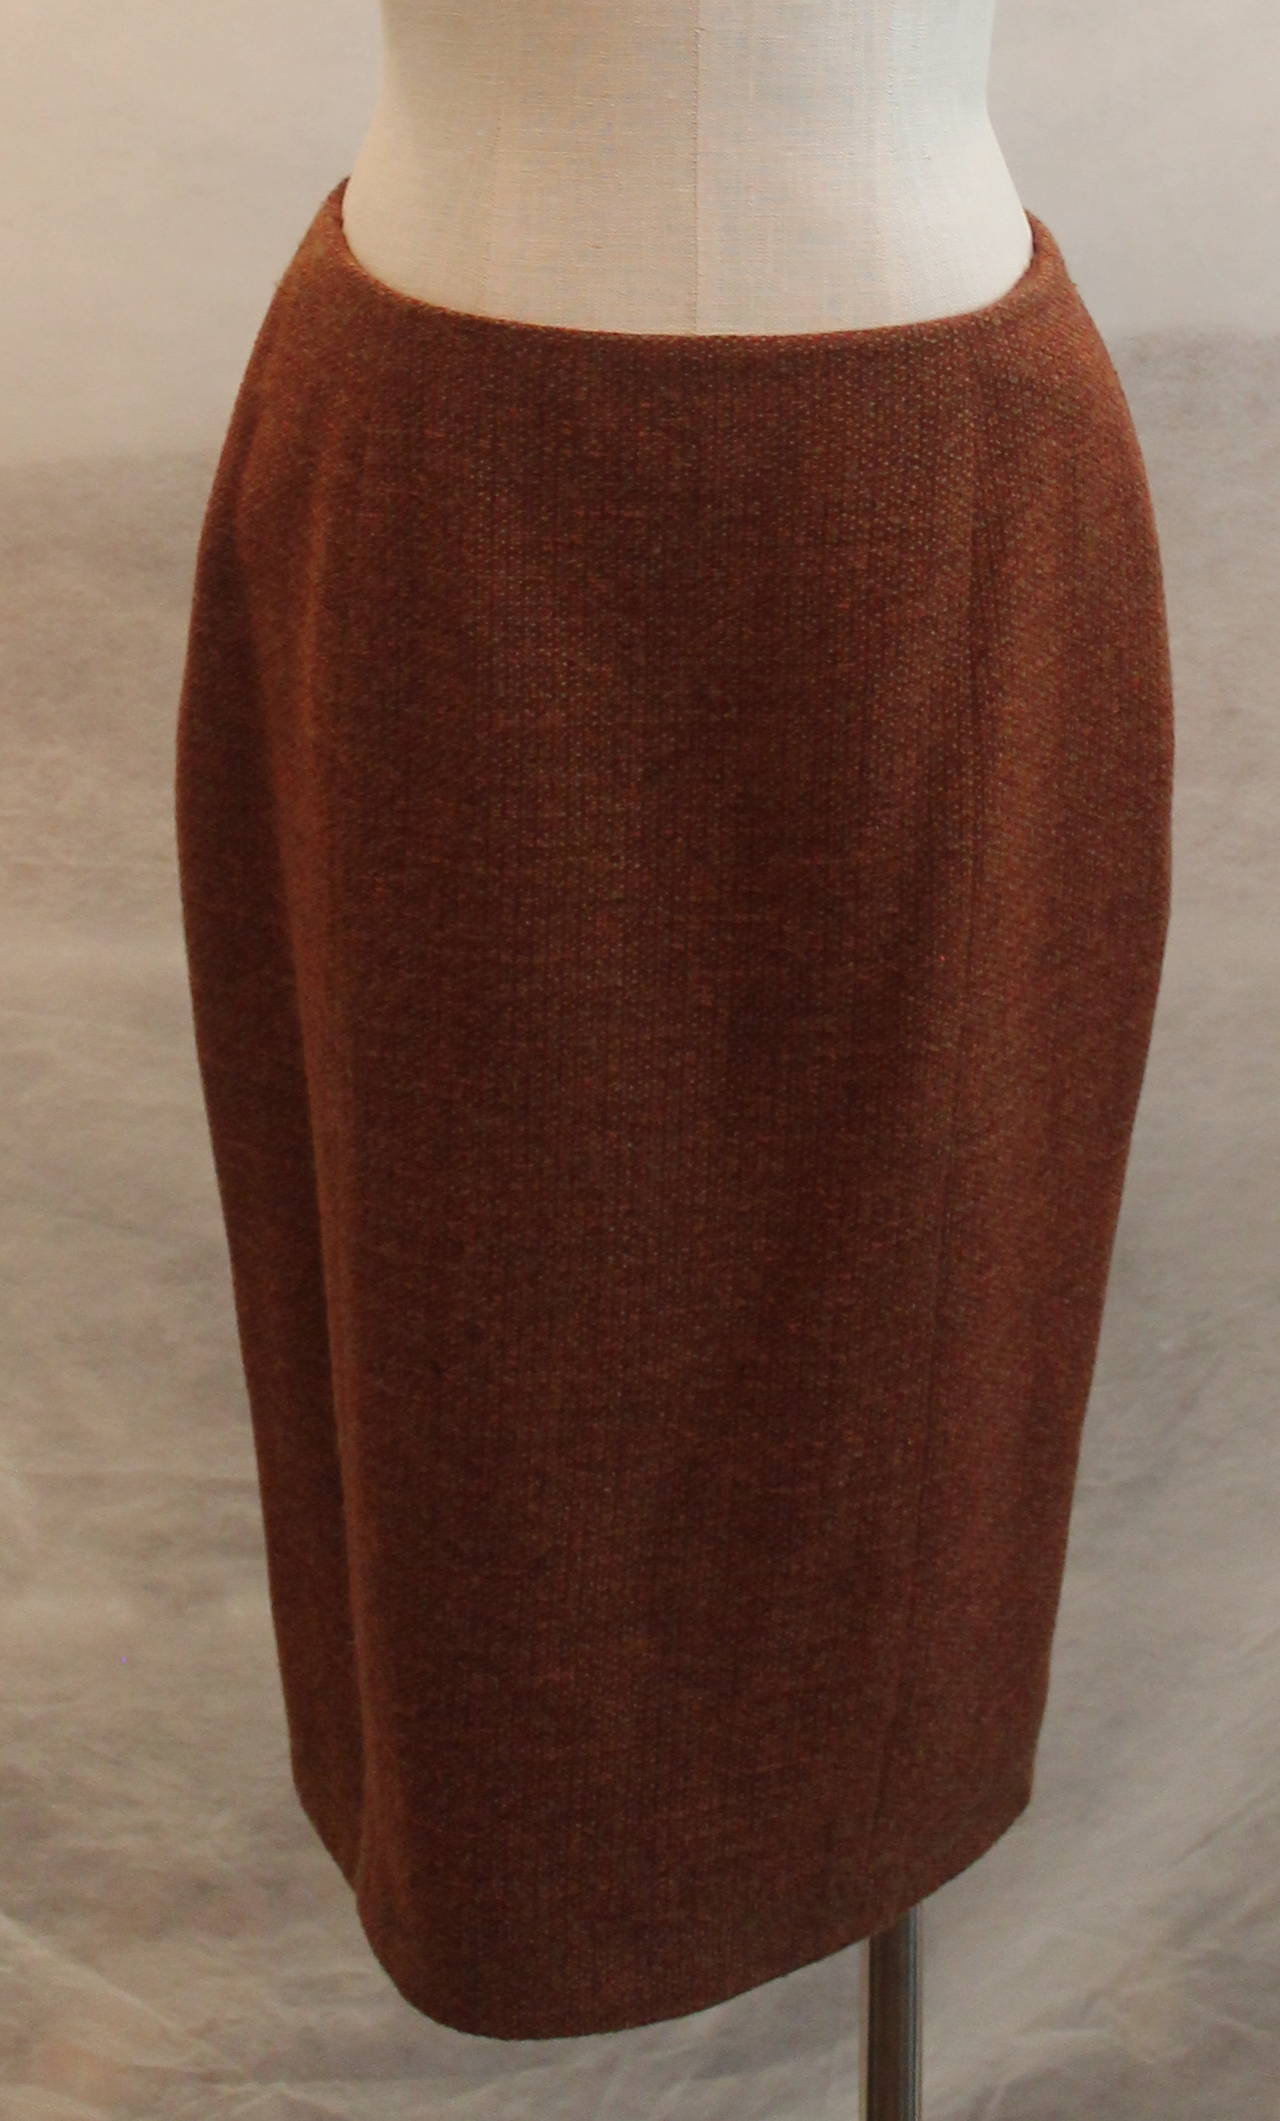 Chanel Rust Wool Blend Skirt Suit - 42 - Circa 1998 In Good Condition For Sale In West Palm Beach, FL